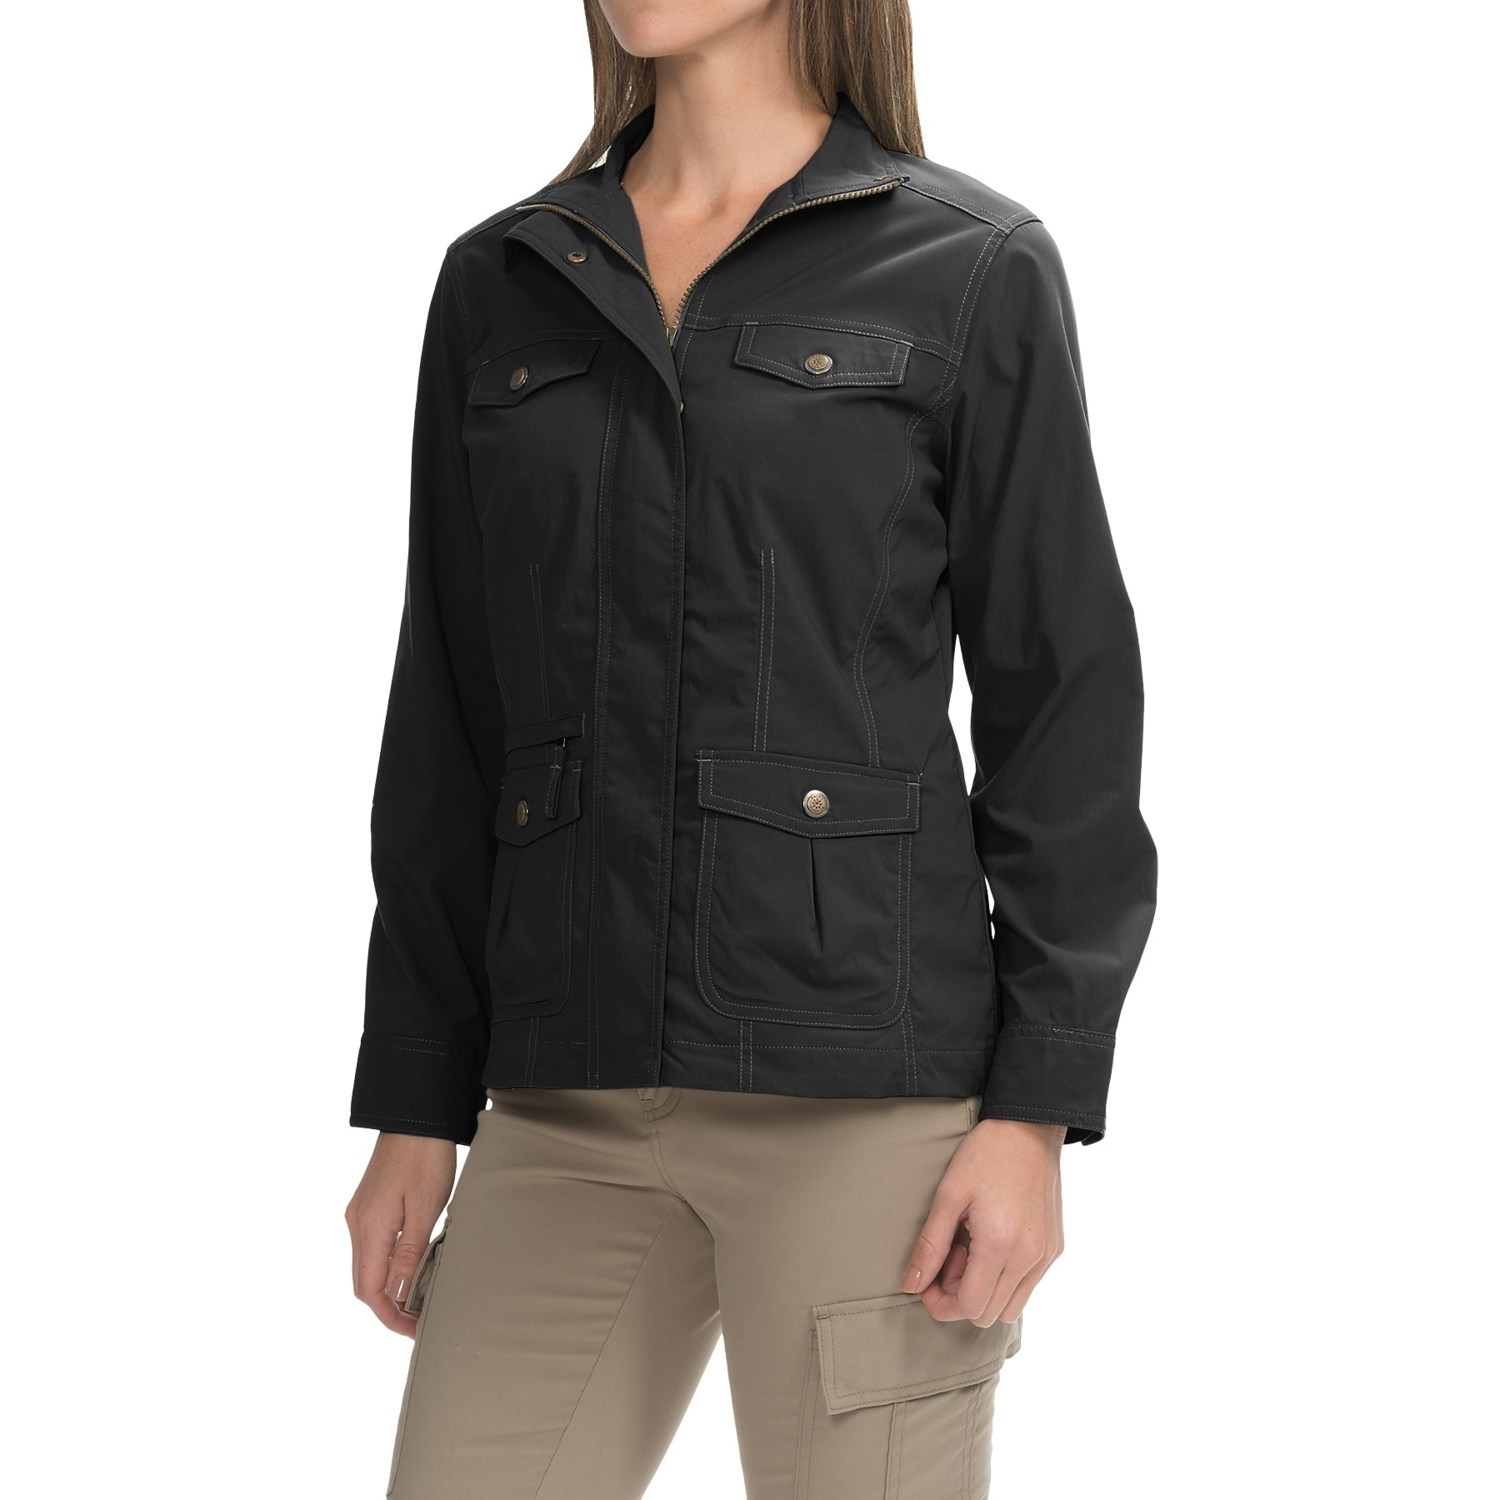 Royal Robbins Discovery Jacket (For Women) - Save 50%